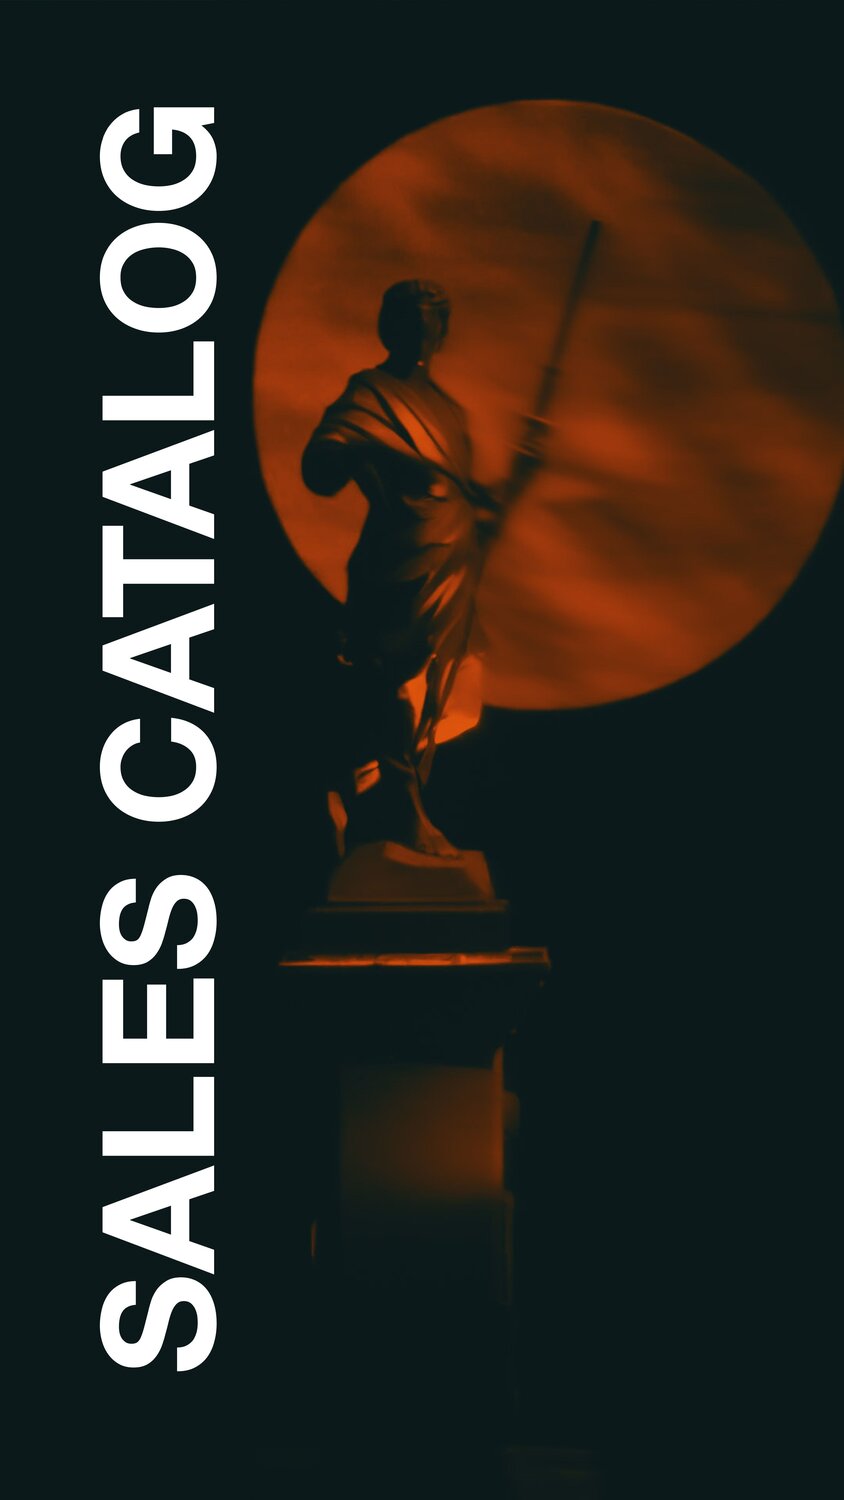 The monochromatic image of a sales catalog features a rust-colored depiction of a statue atop a Greek column. In the background, a large moon is prominently visible, adding a celestial element to the scene. The use of rust-colored hues creates a warm, earthy tone, while the contrast with the moon's cooler shades provides depth to the image. This artistic blend of classical architecture and cosmic imagery gives the catalog cover a unique and striking appearance.